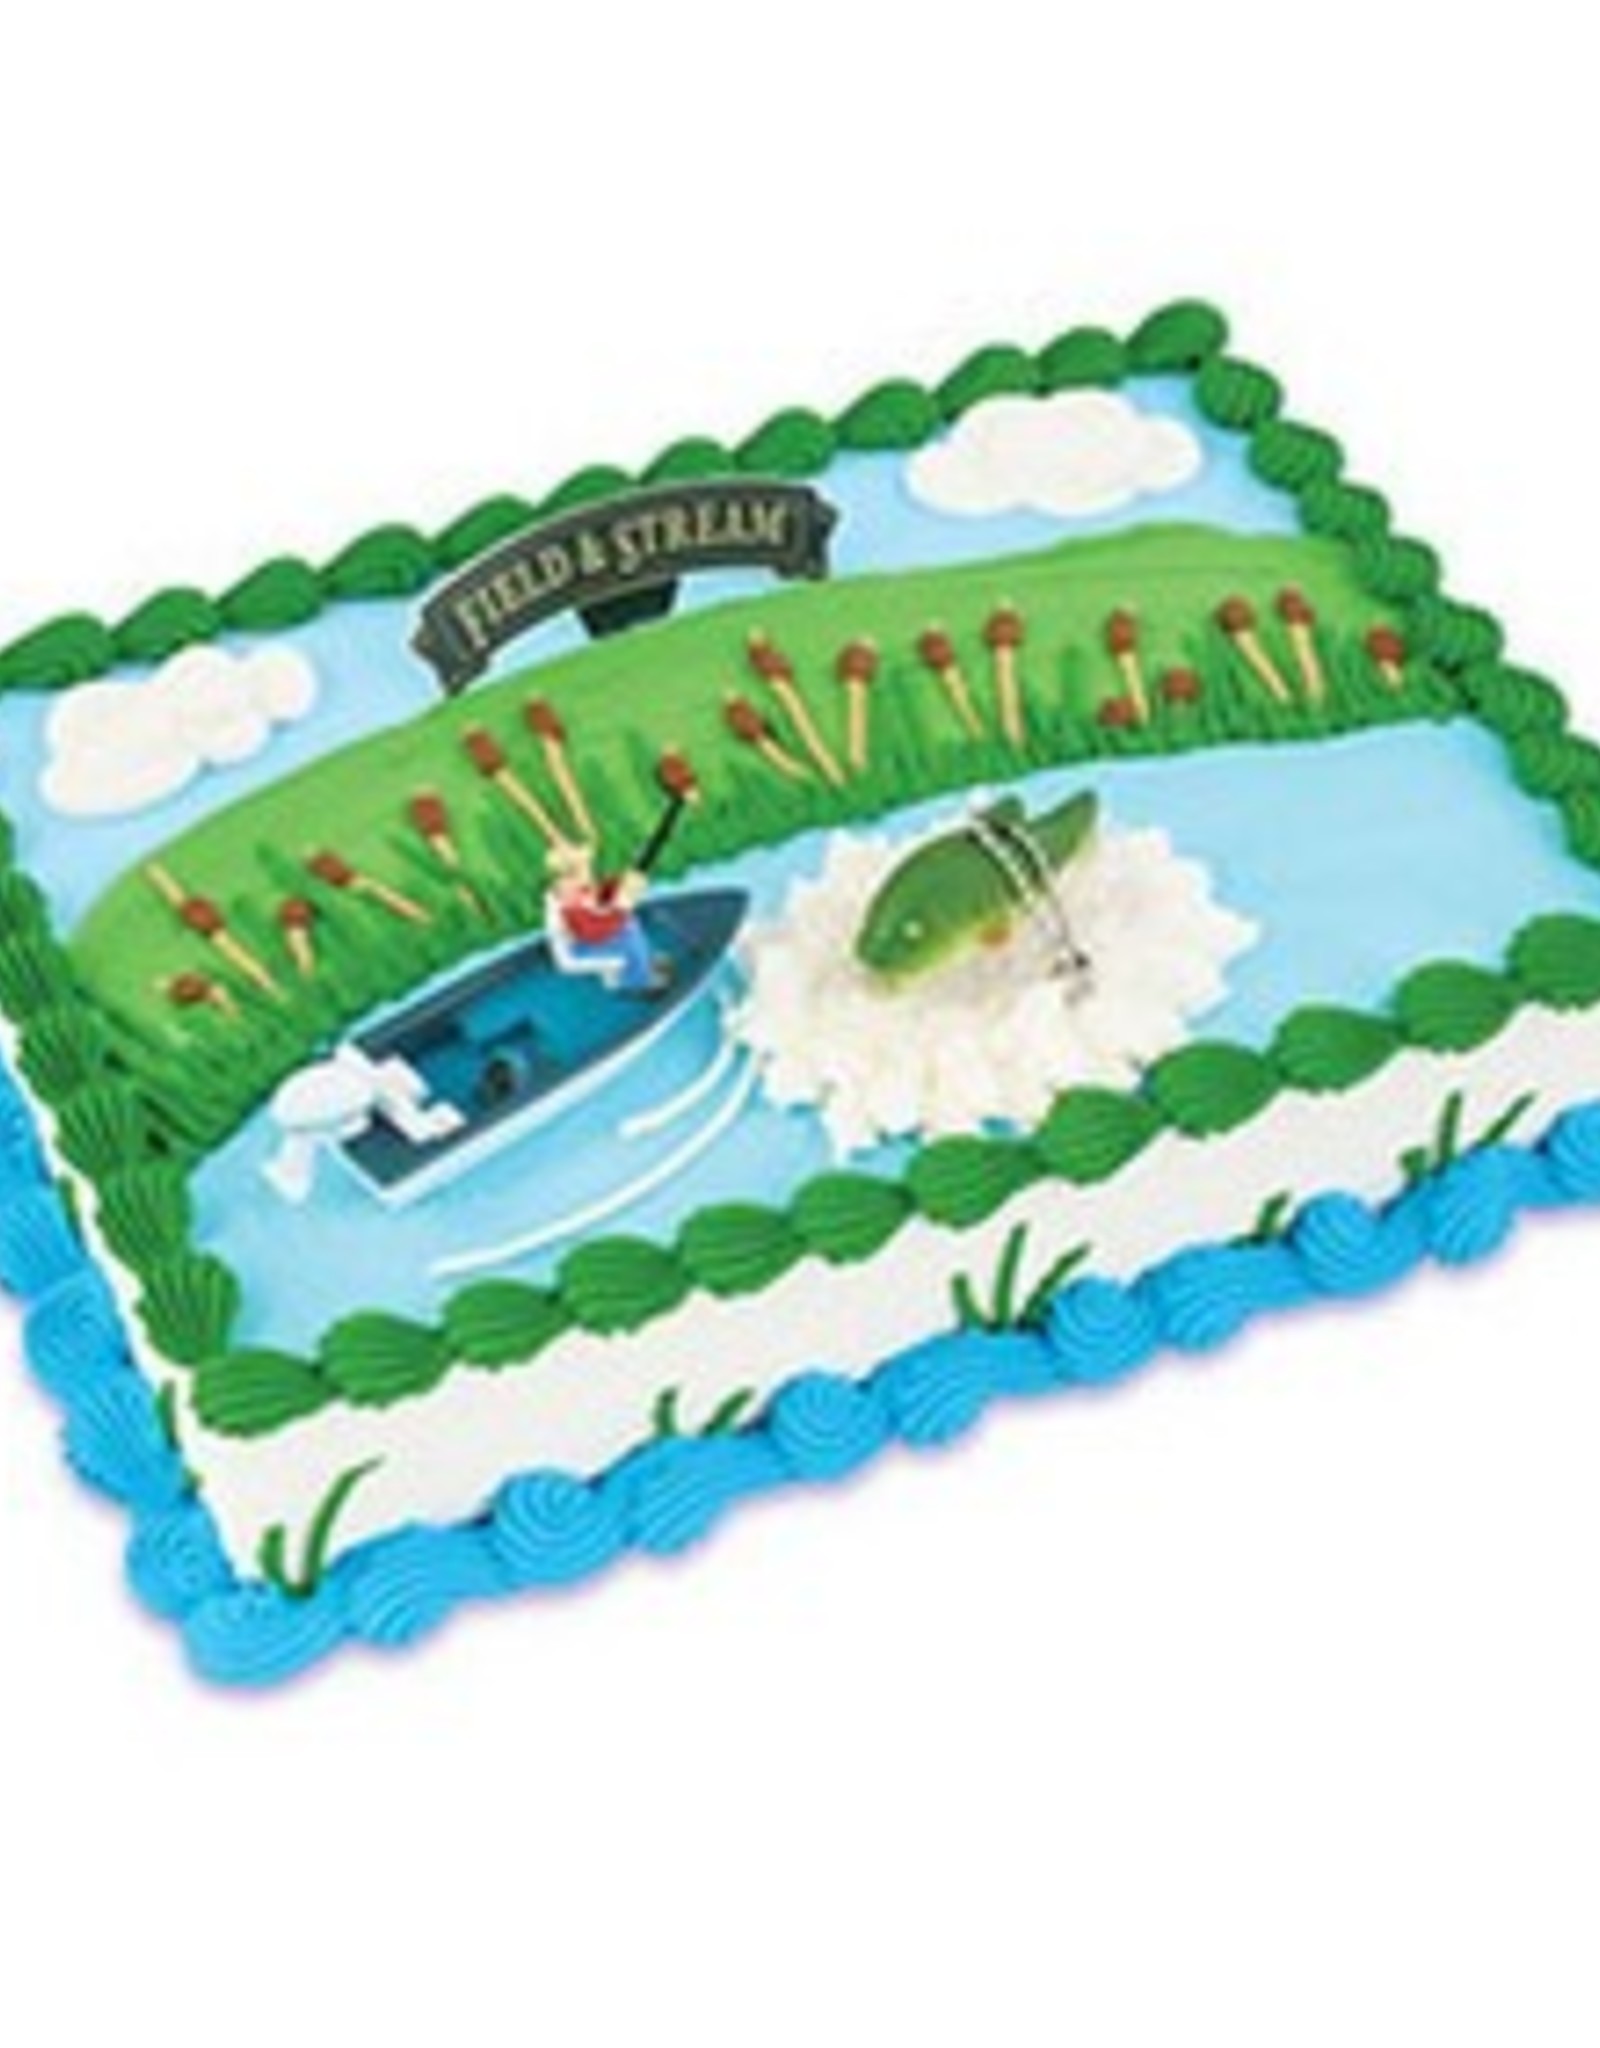 Field and Stream Bass Fisherman Cake Topper